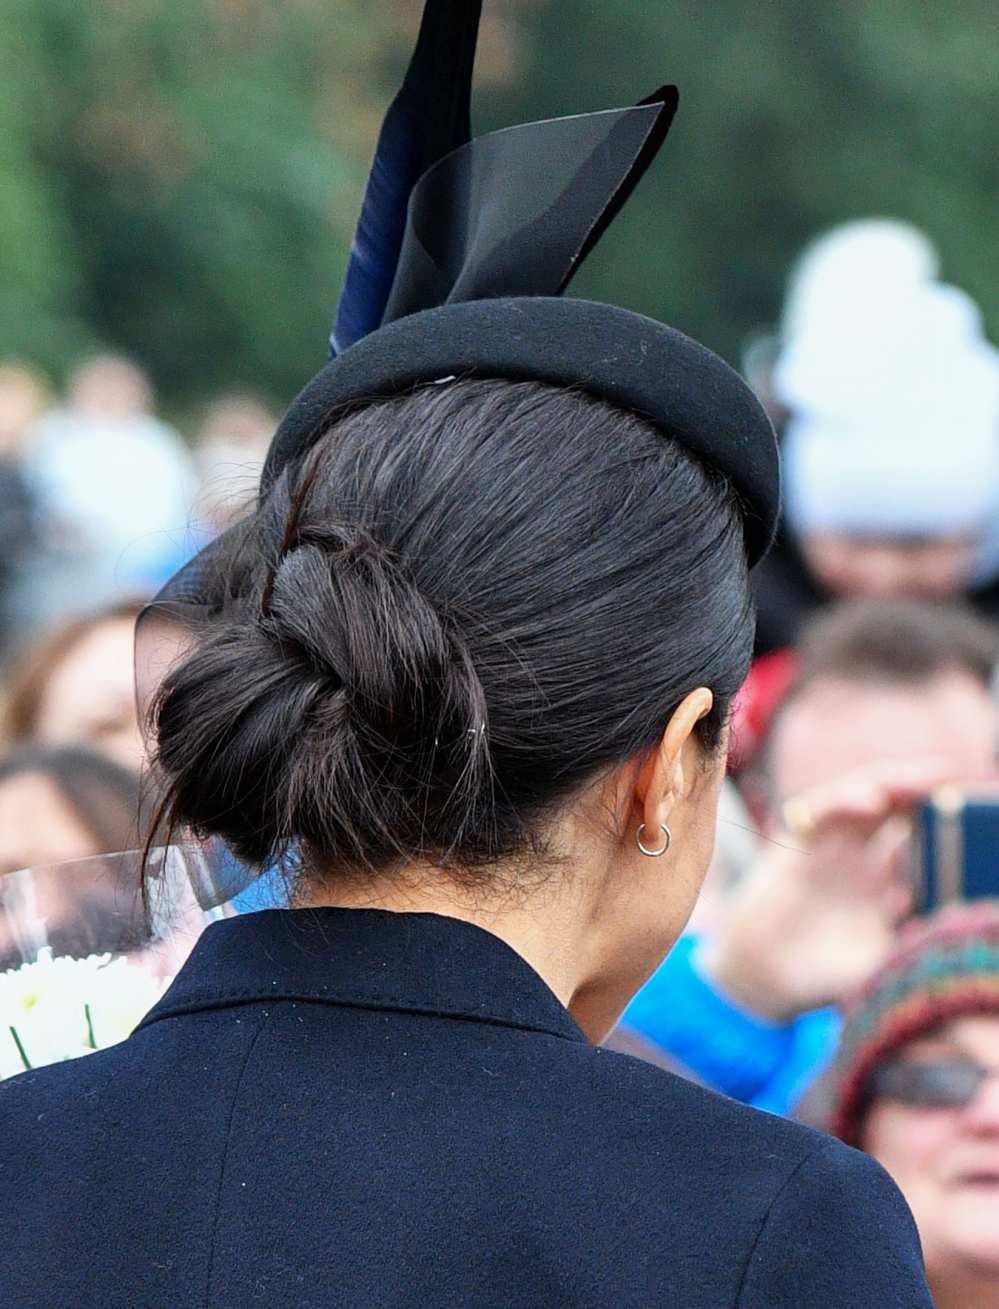 Meghan Markle's Messy Bun Was an Intentional Blend of Royal and Trendy